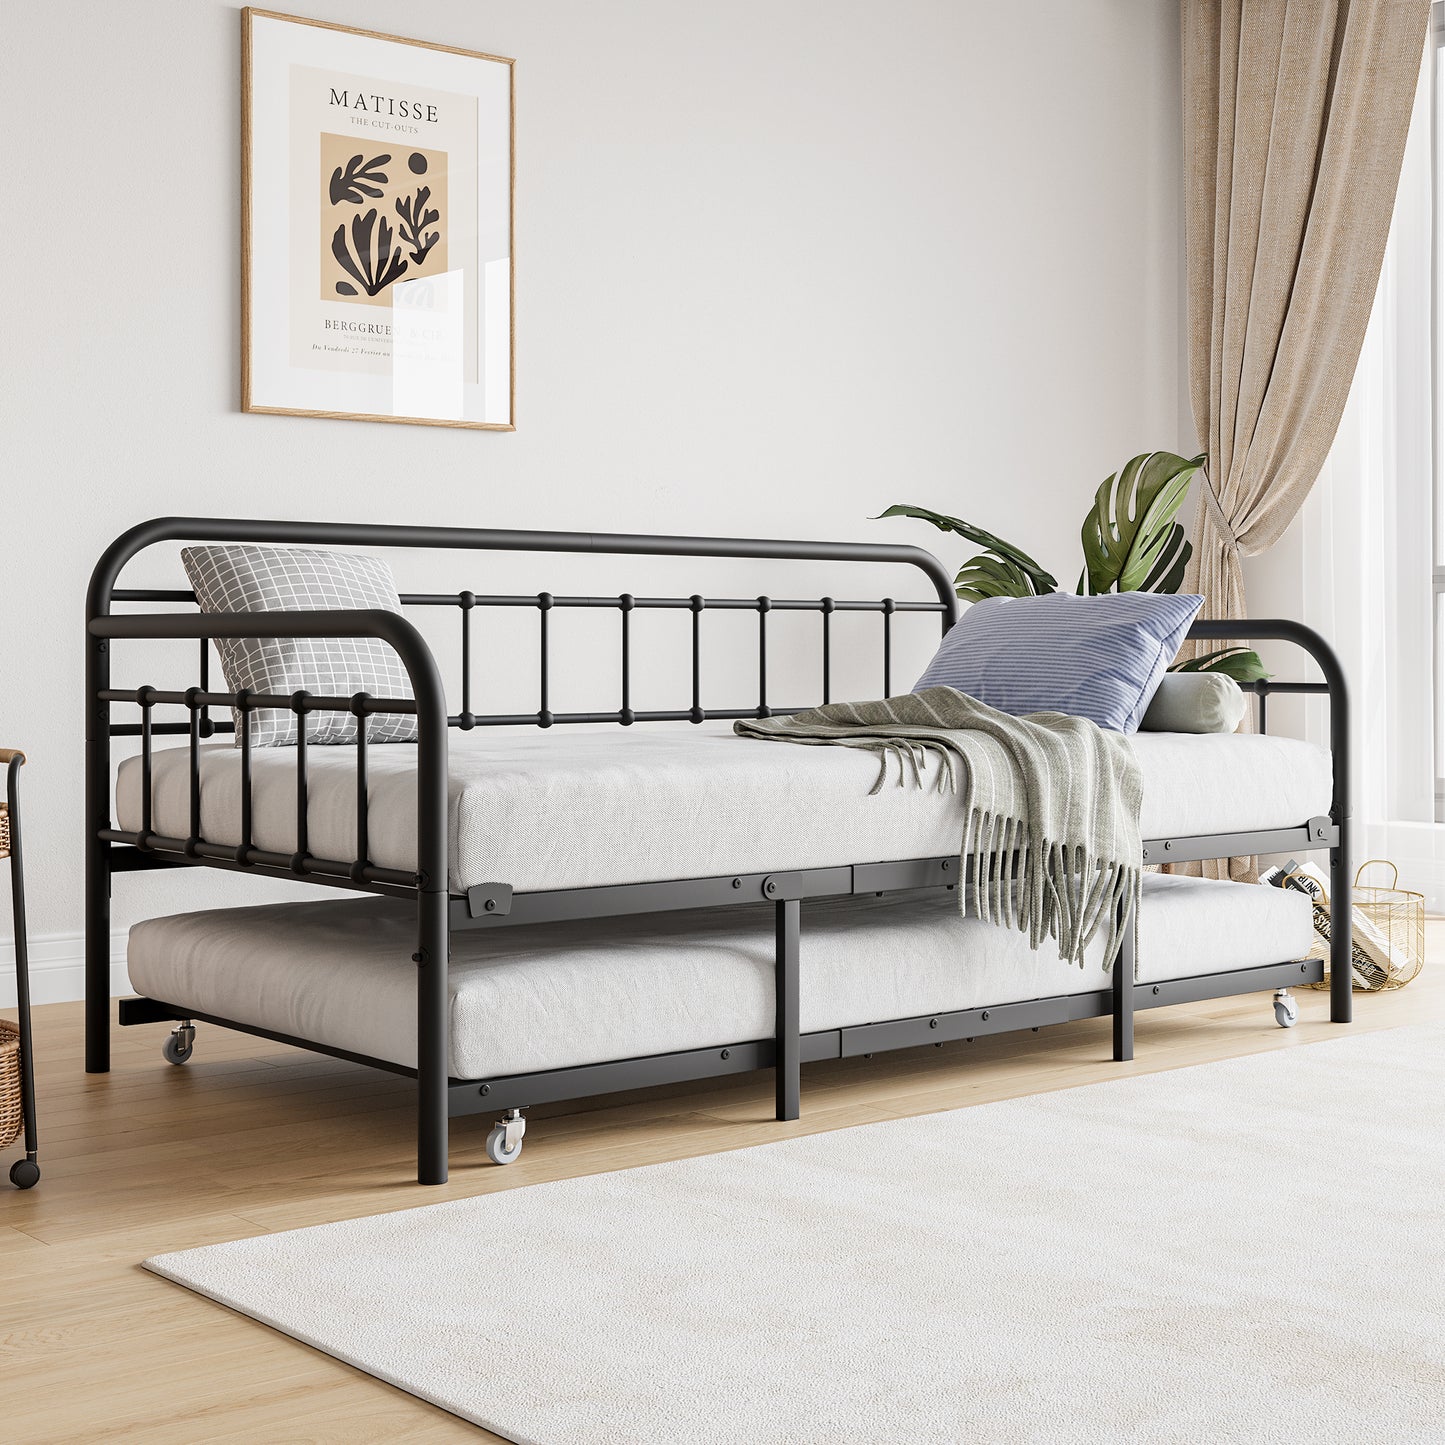 Twin Size Metal Daybed Frame with Trundle, Heavy Duty Steel Slat Support Sofa Bed Platform with Headboard, No Box Spring Needed, Black